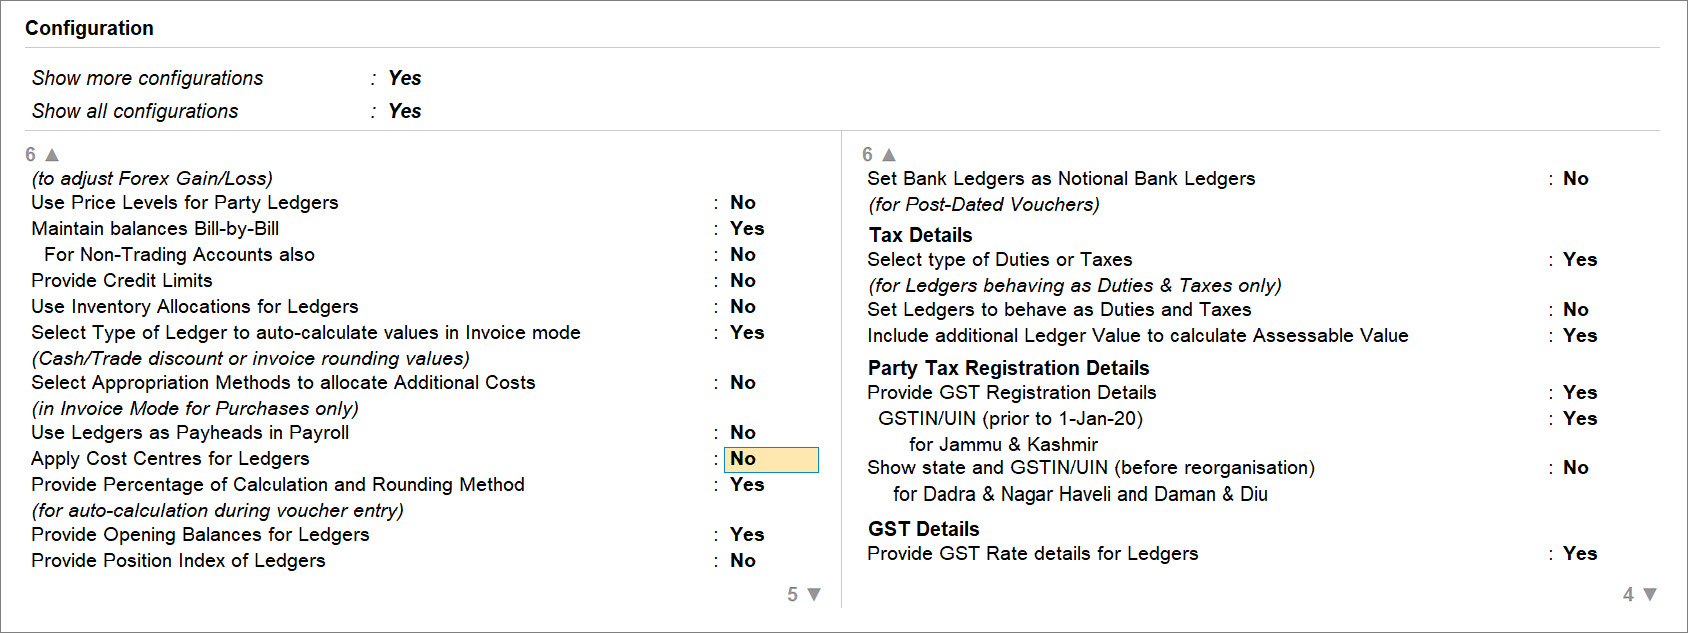 Set or Apply Cost Centres for Ledgers to Yes in TallyPrime